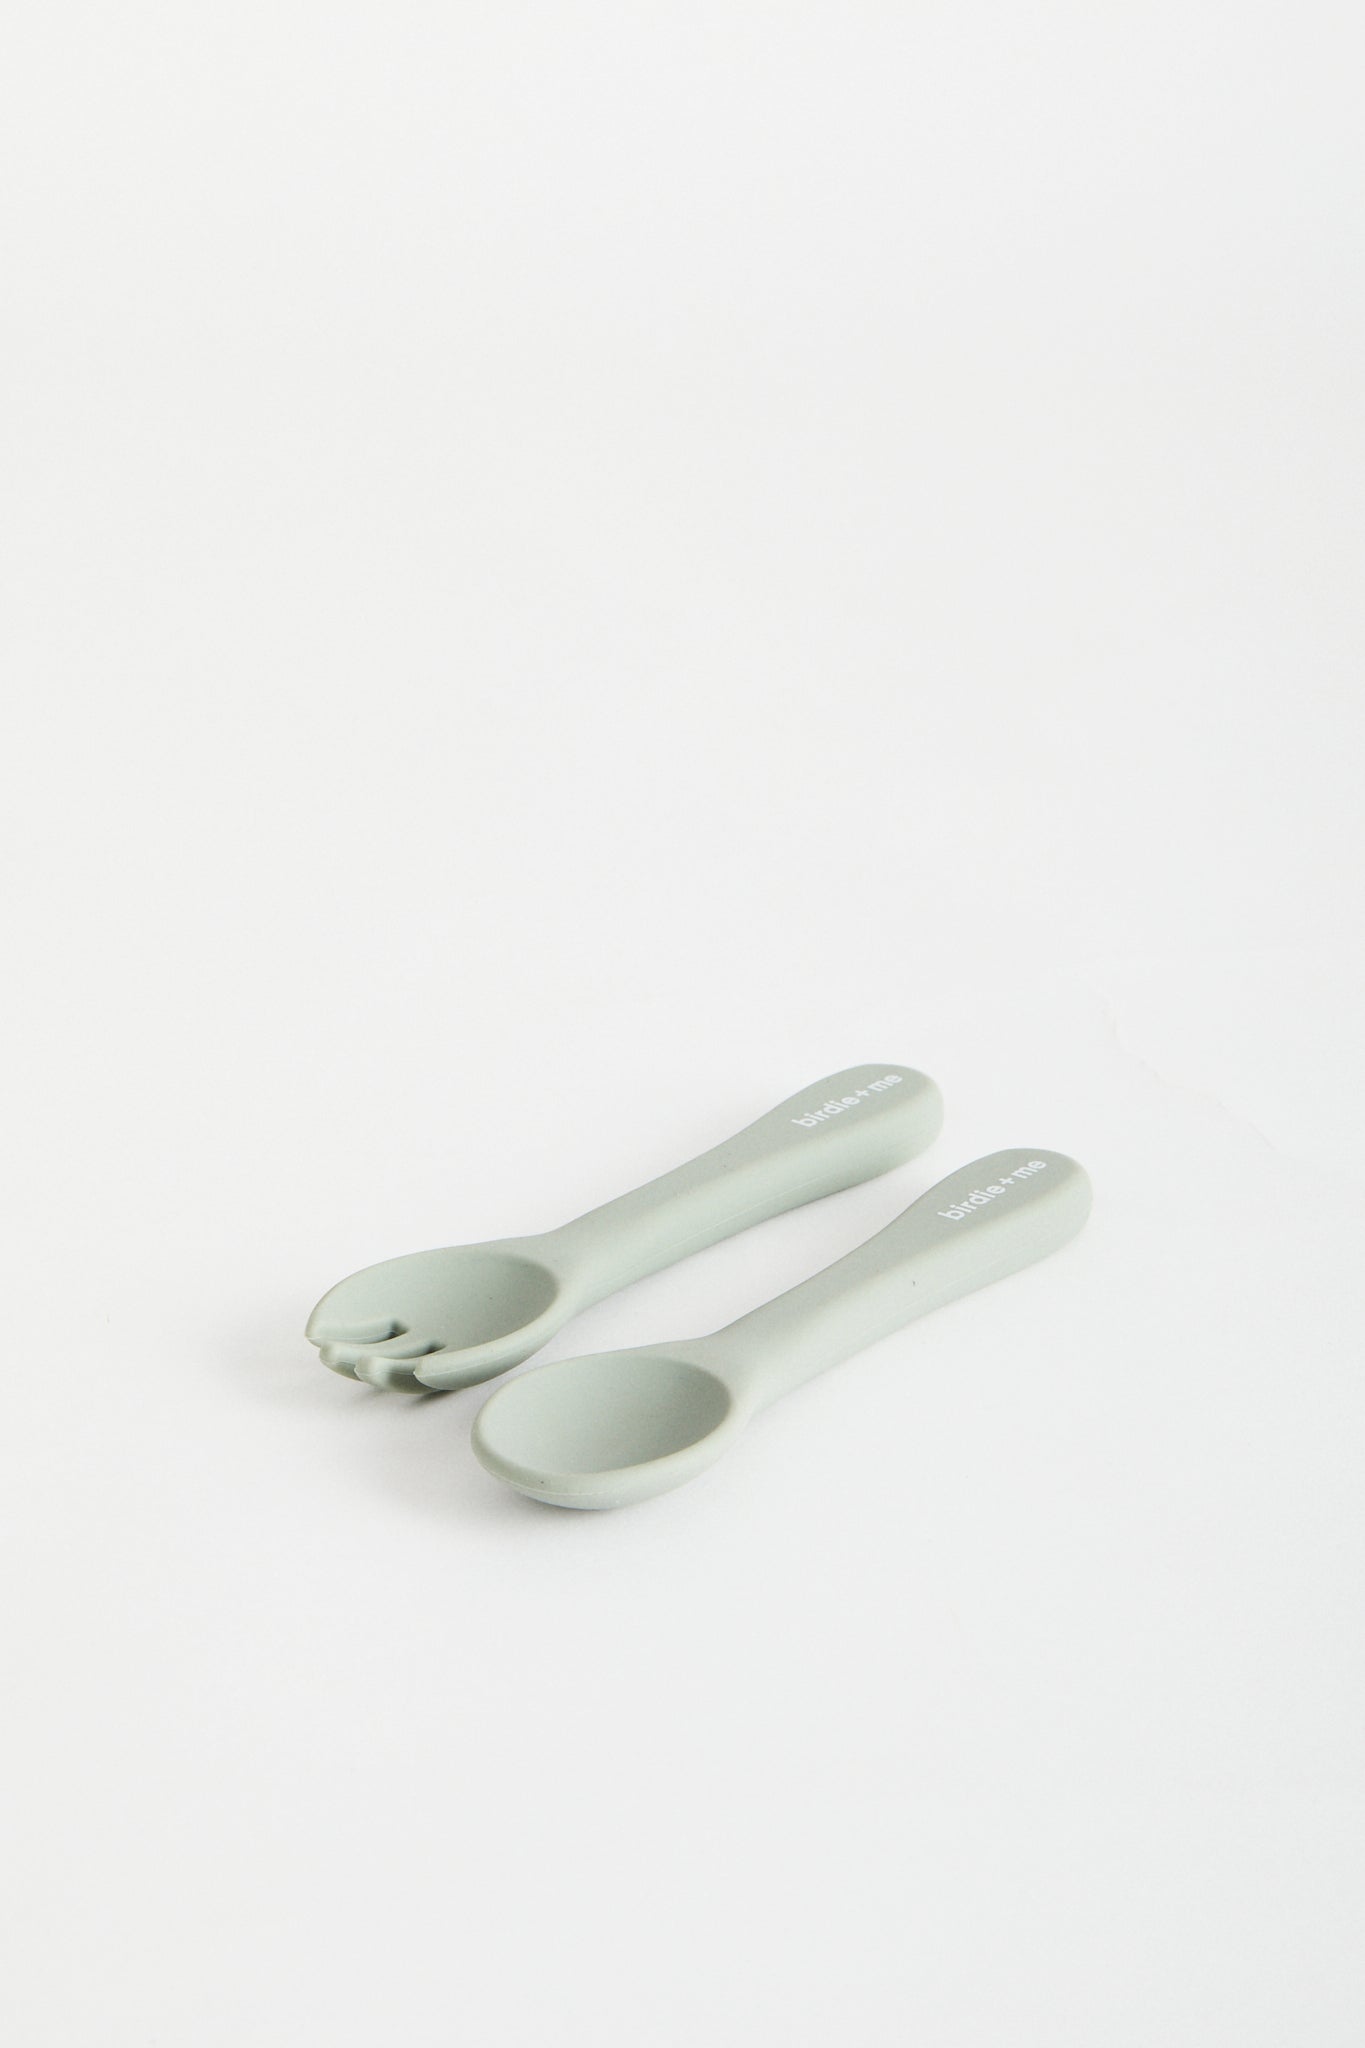 Silicon spoon & fork set in Teal, birdie + me logo on handle.